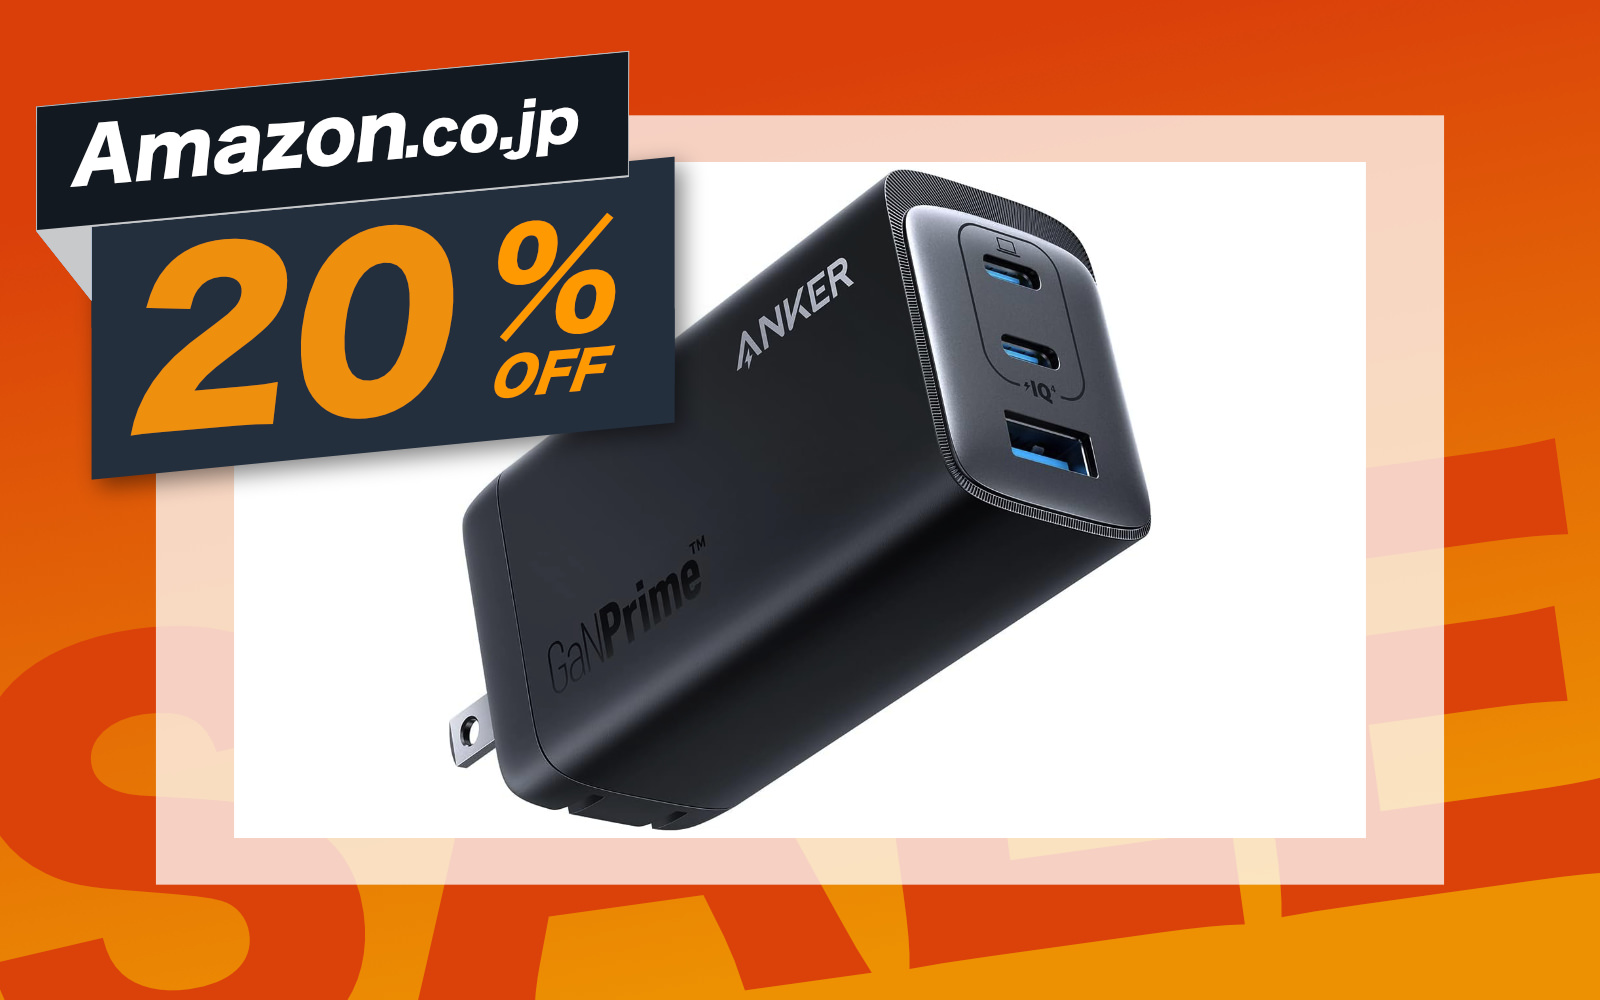 Anker 737 charger on sale